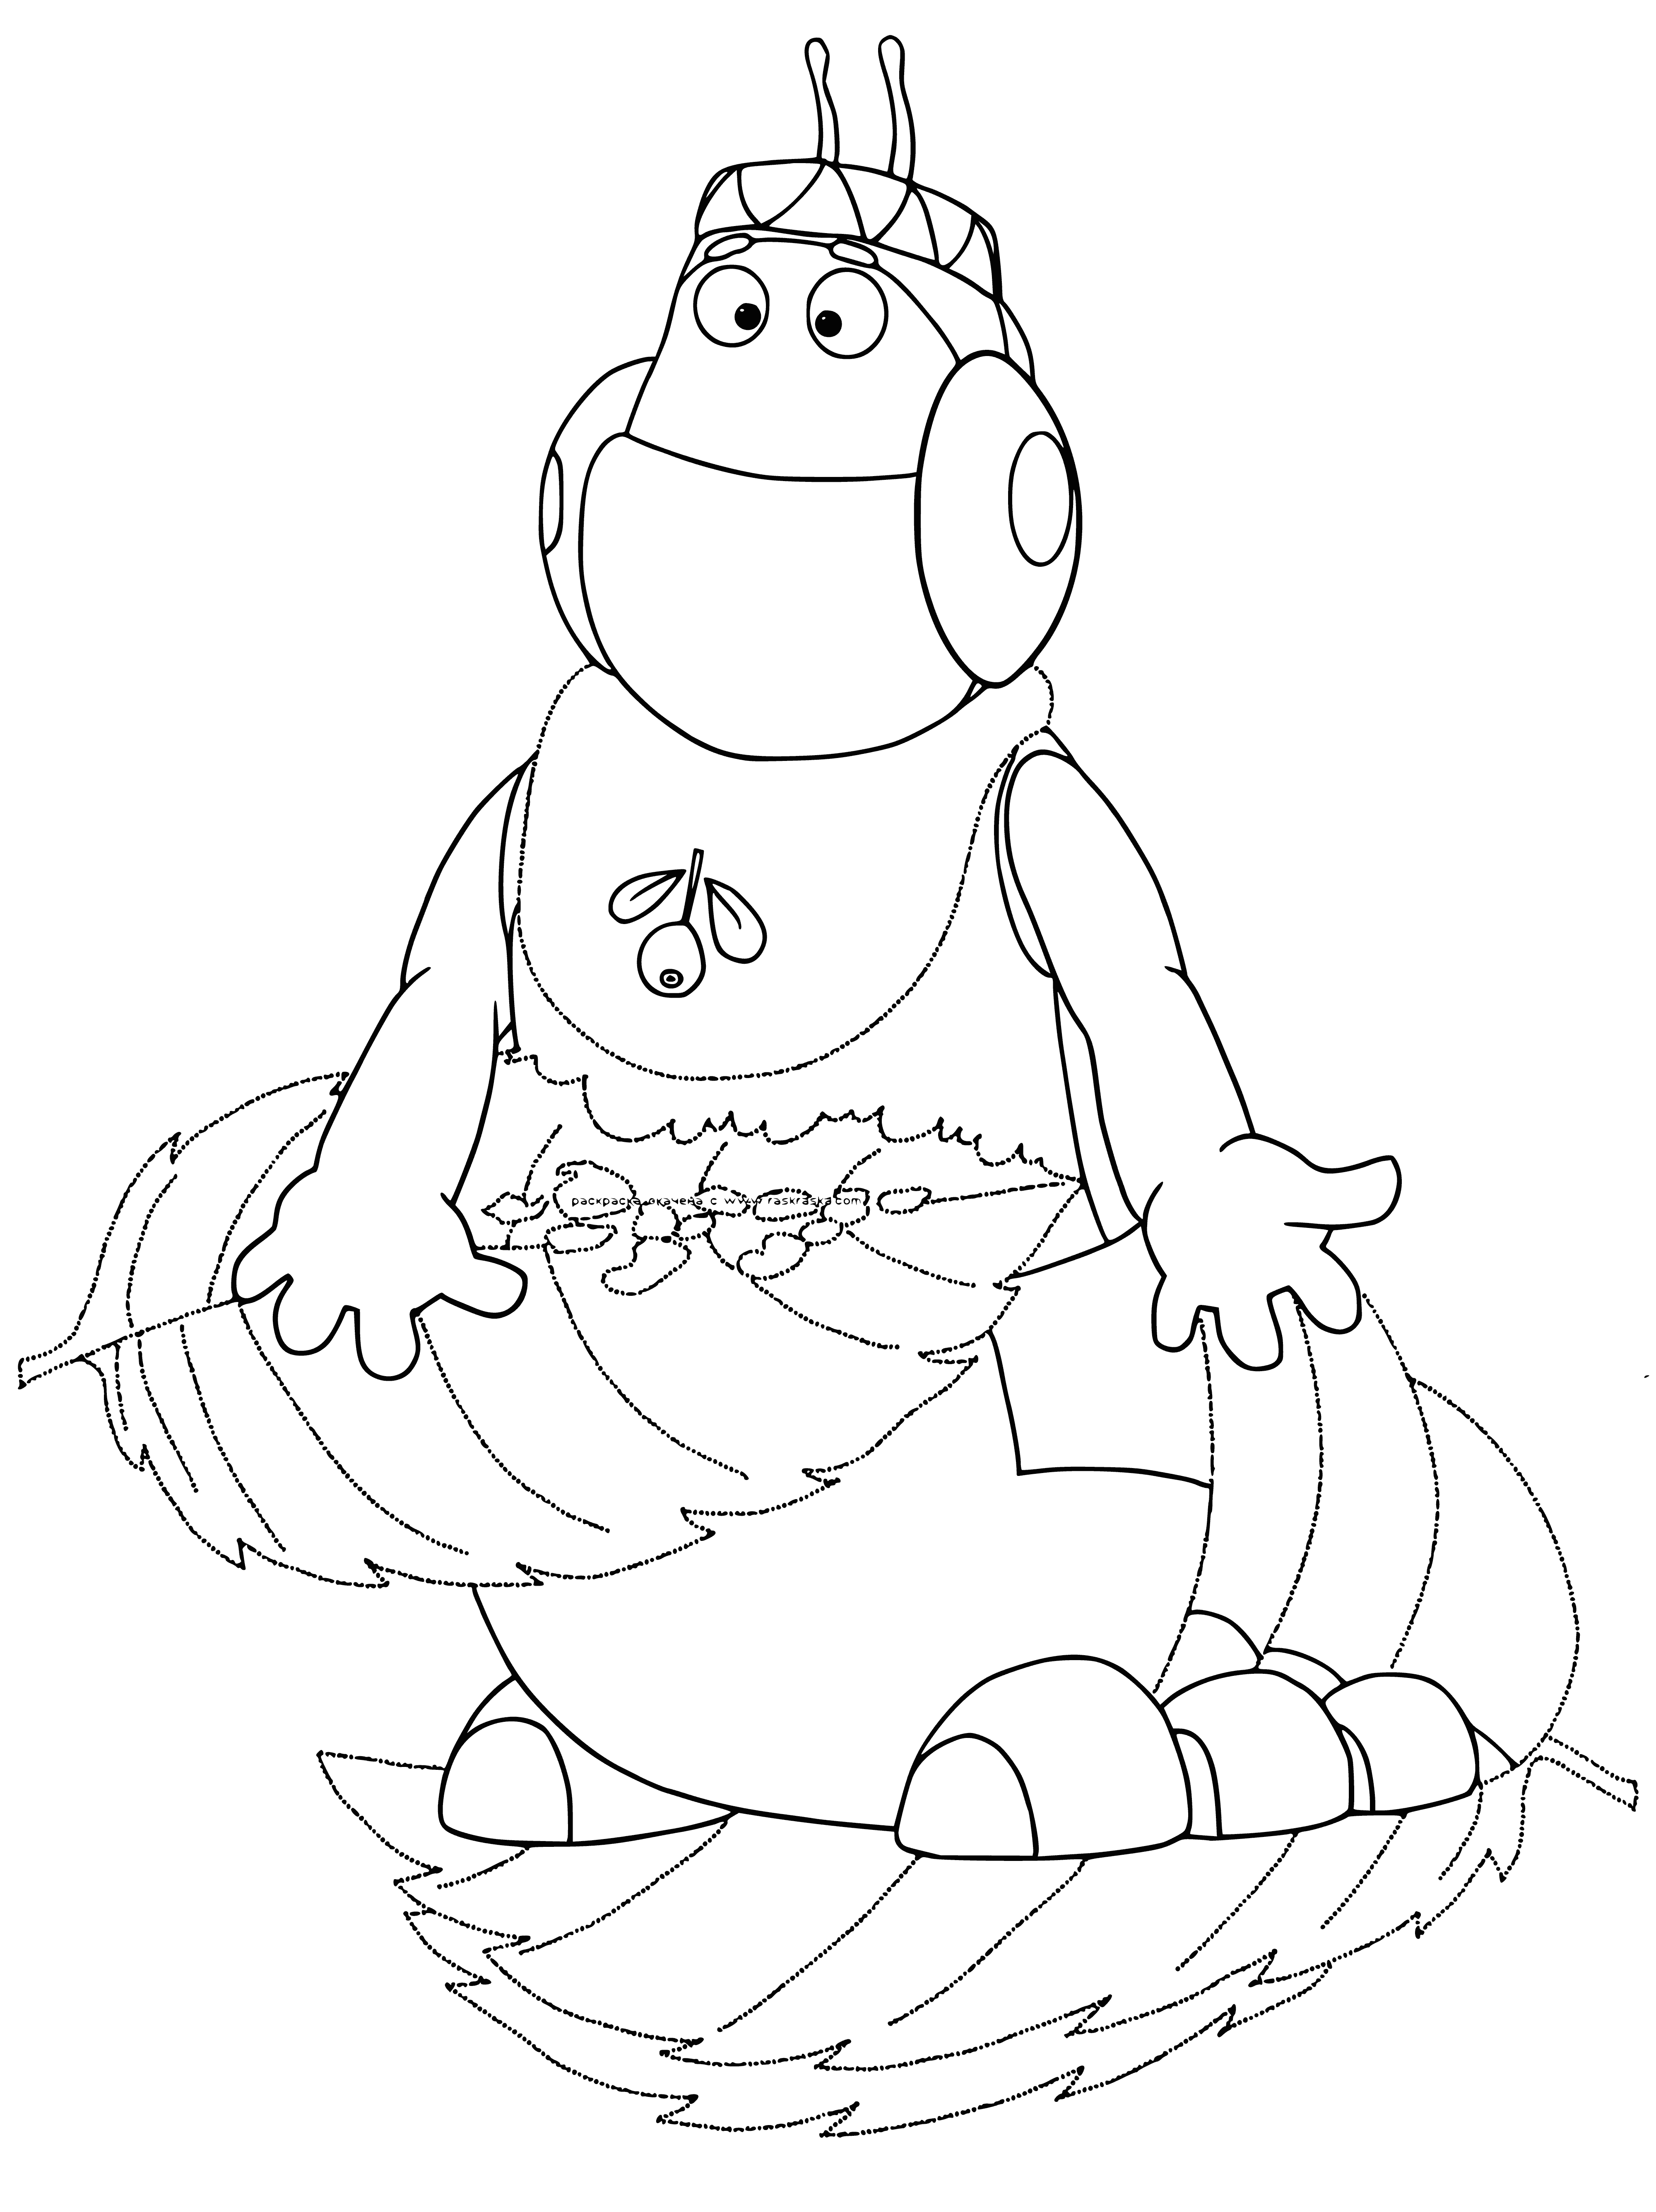 coloring page: Giant blue creature w/ large nose & big eyes is surrounded by smaller creatures w/ different colors & patterns on their fur, all appearing friendly.